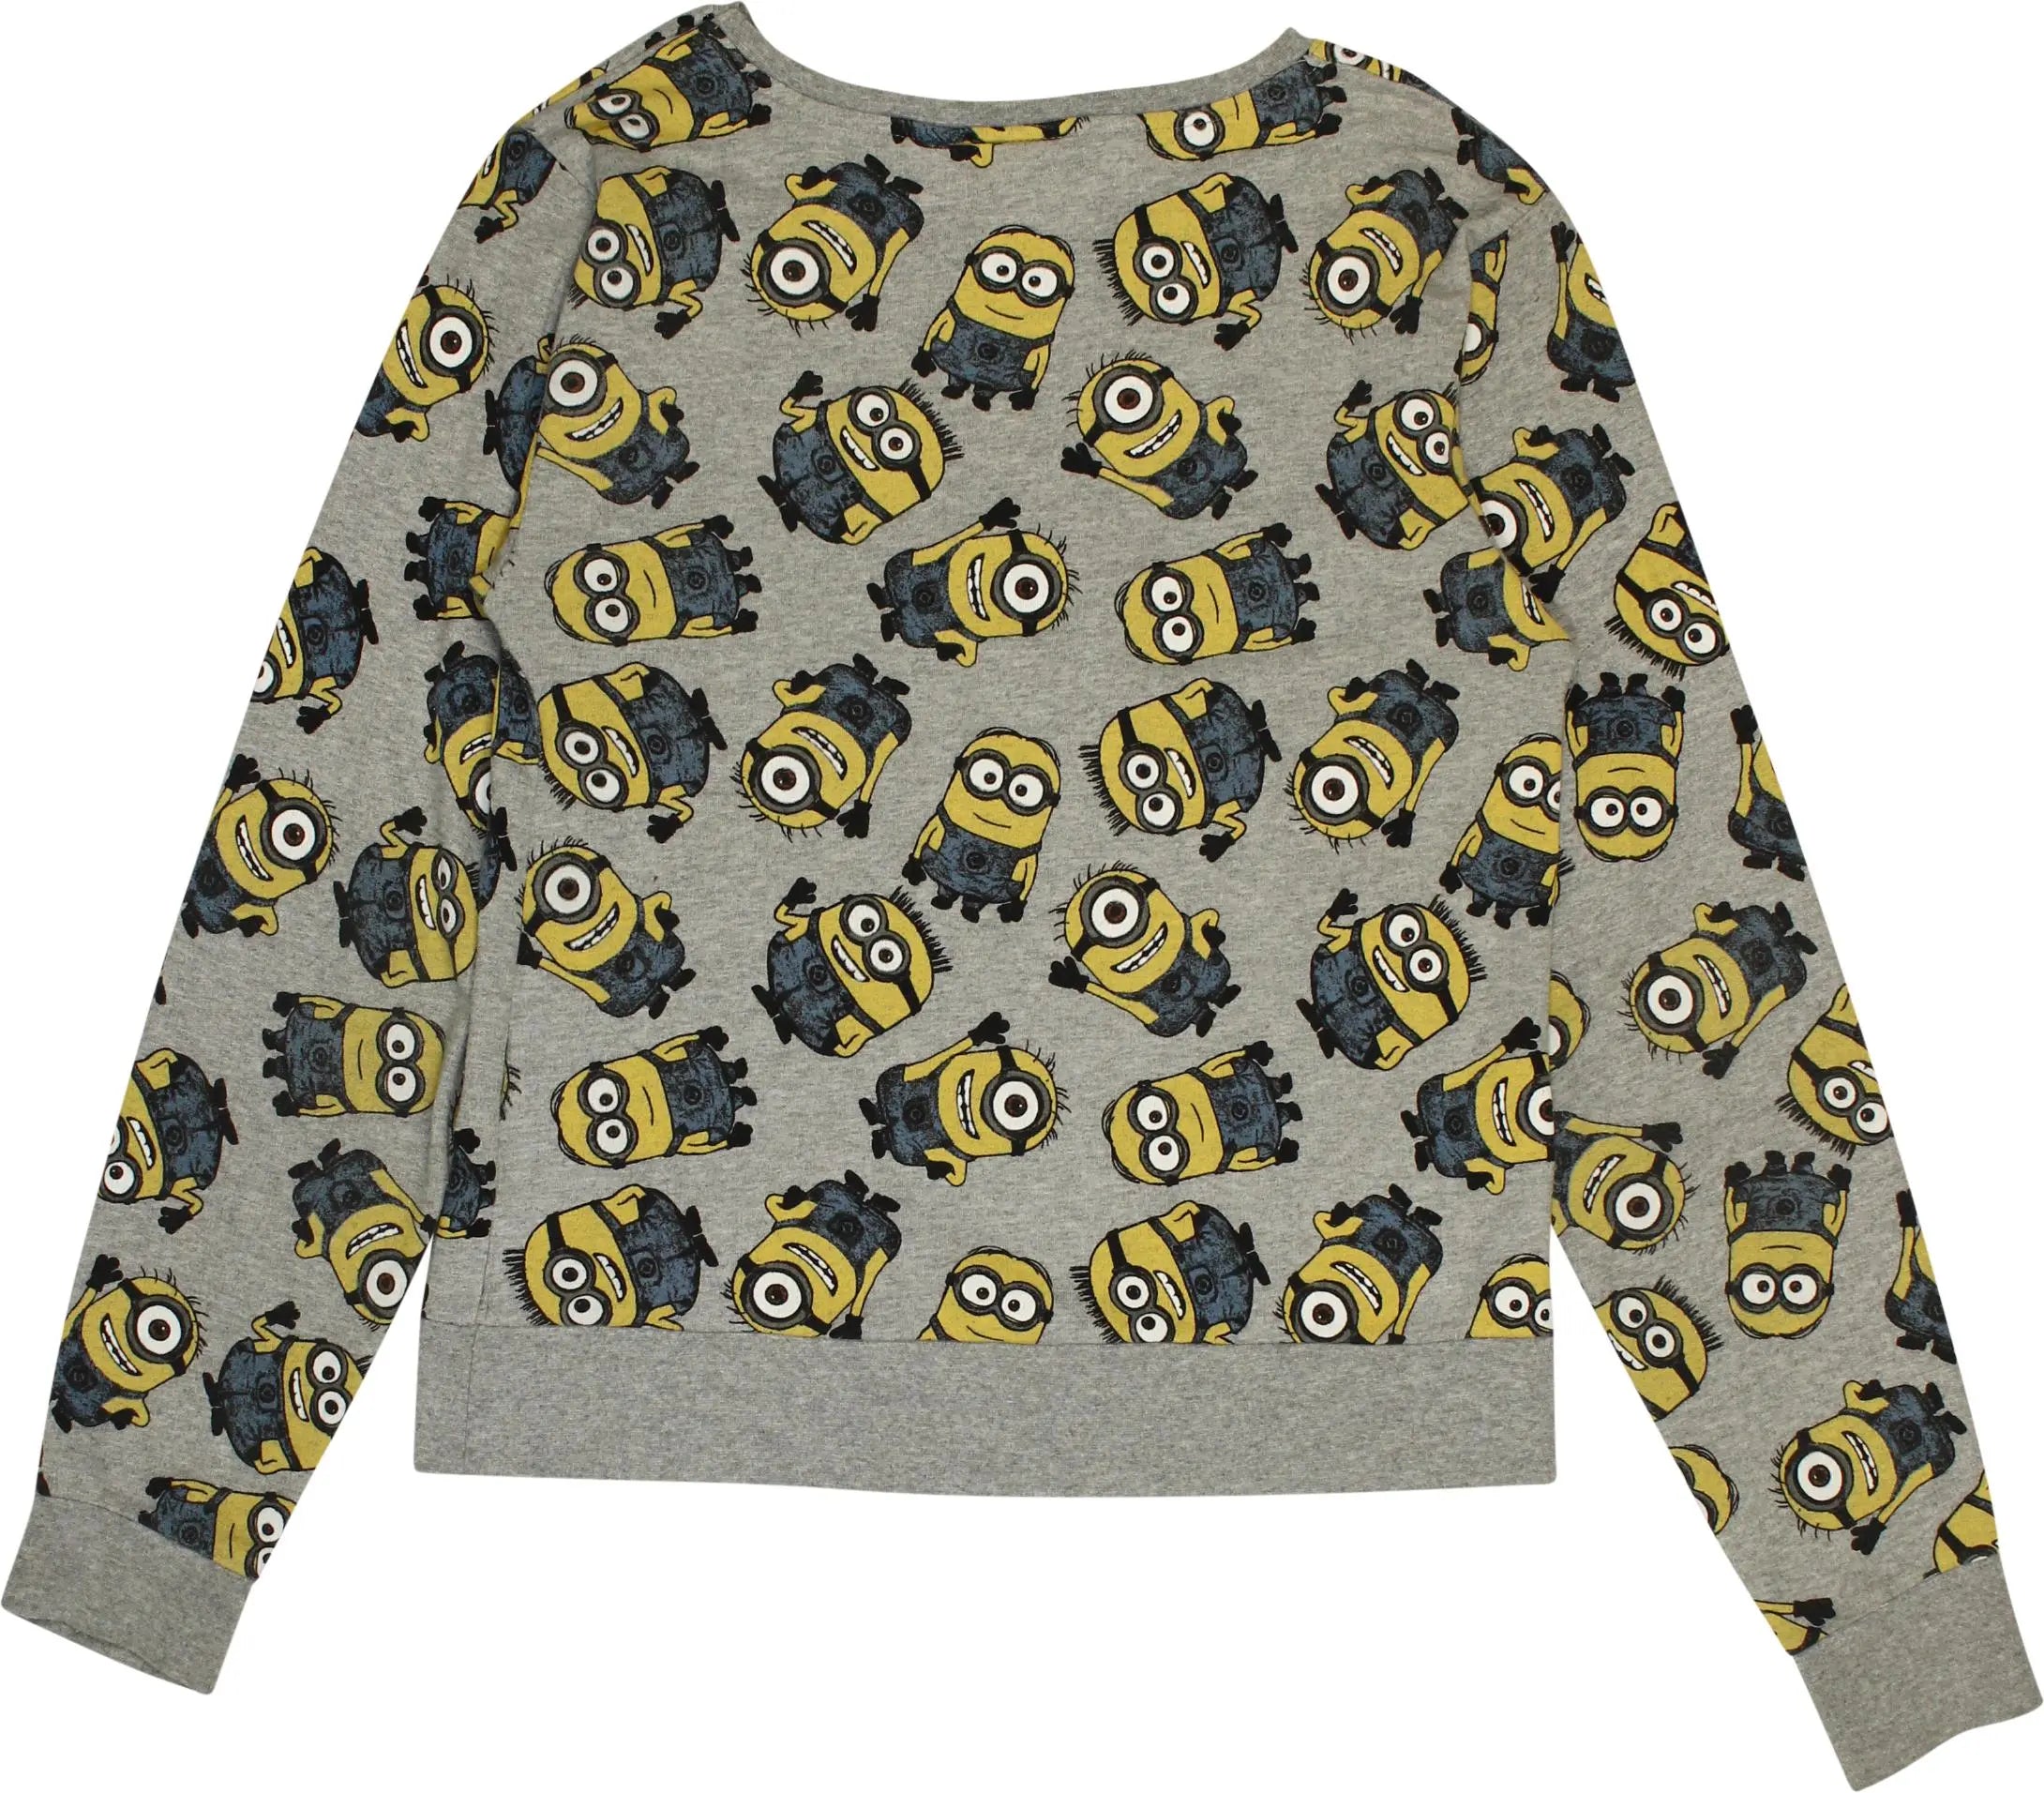 Primark - Despicable Me Sweater with Joggers- ThriftTale.com - Vintage and second handclothing